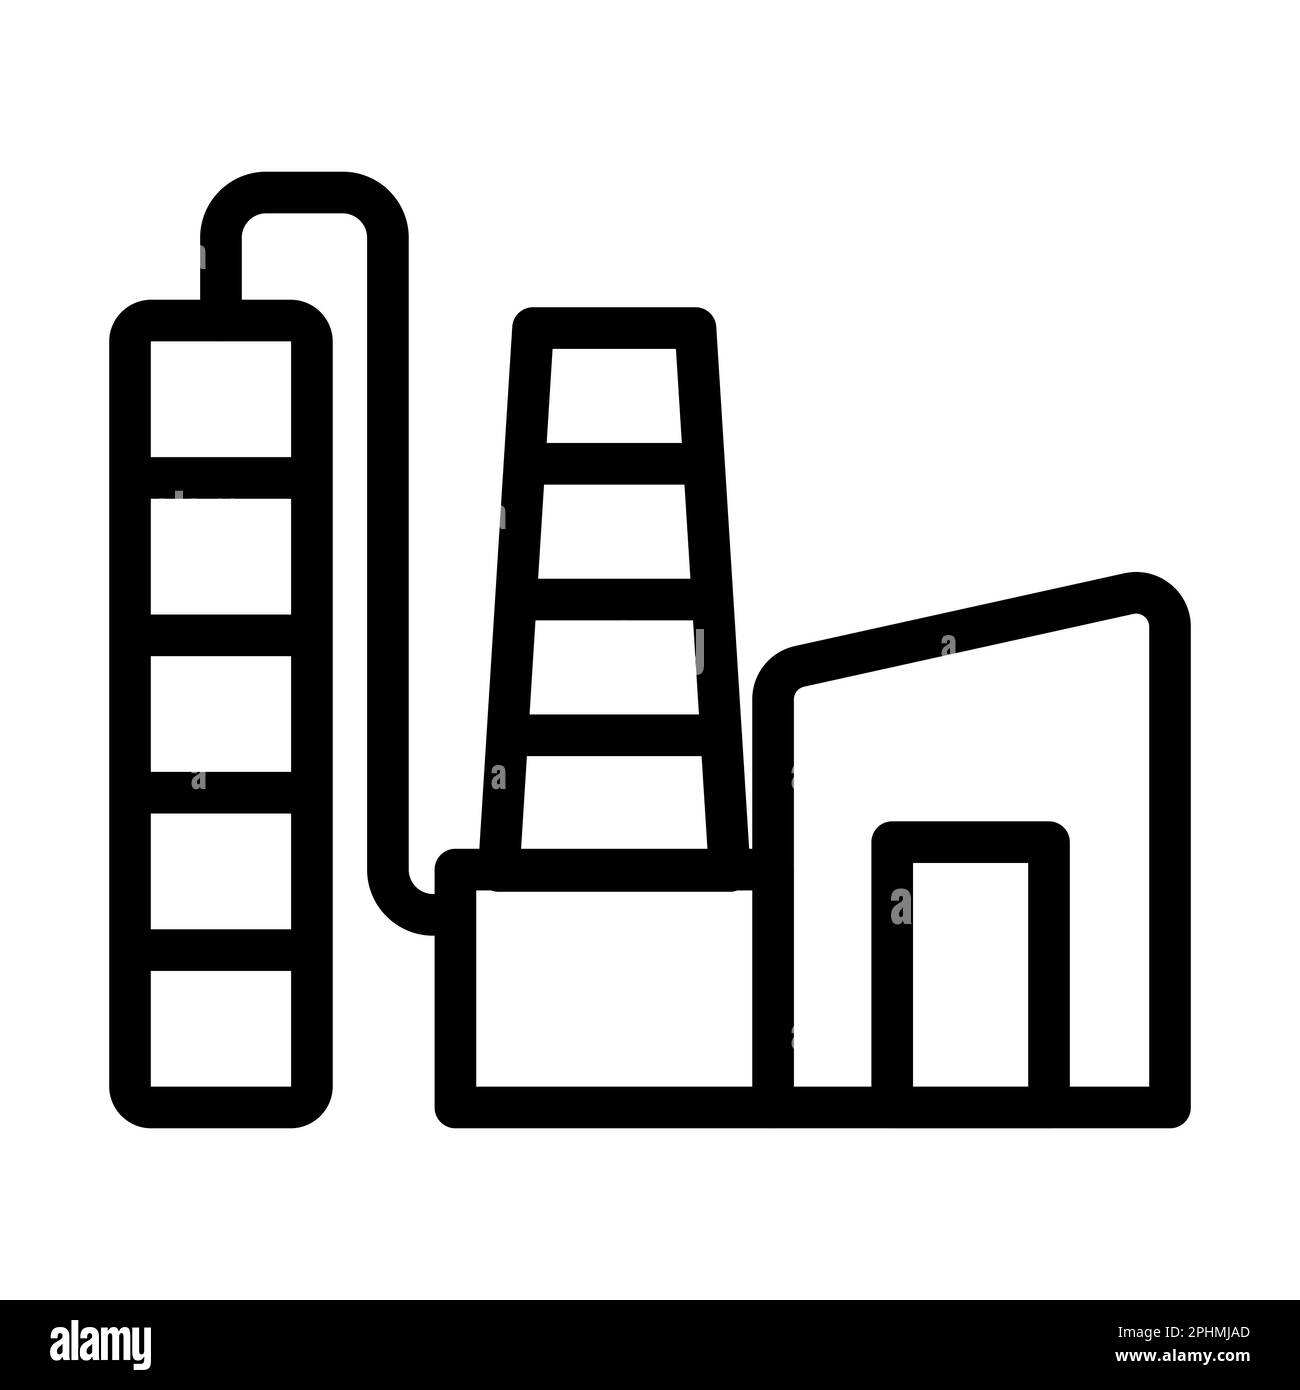 Processing Plant Vector Thick Line Icon For Personal And Commercial Use. Stock Photo